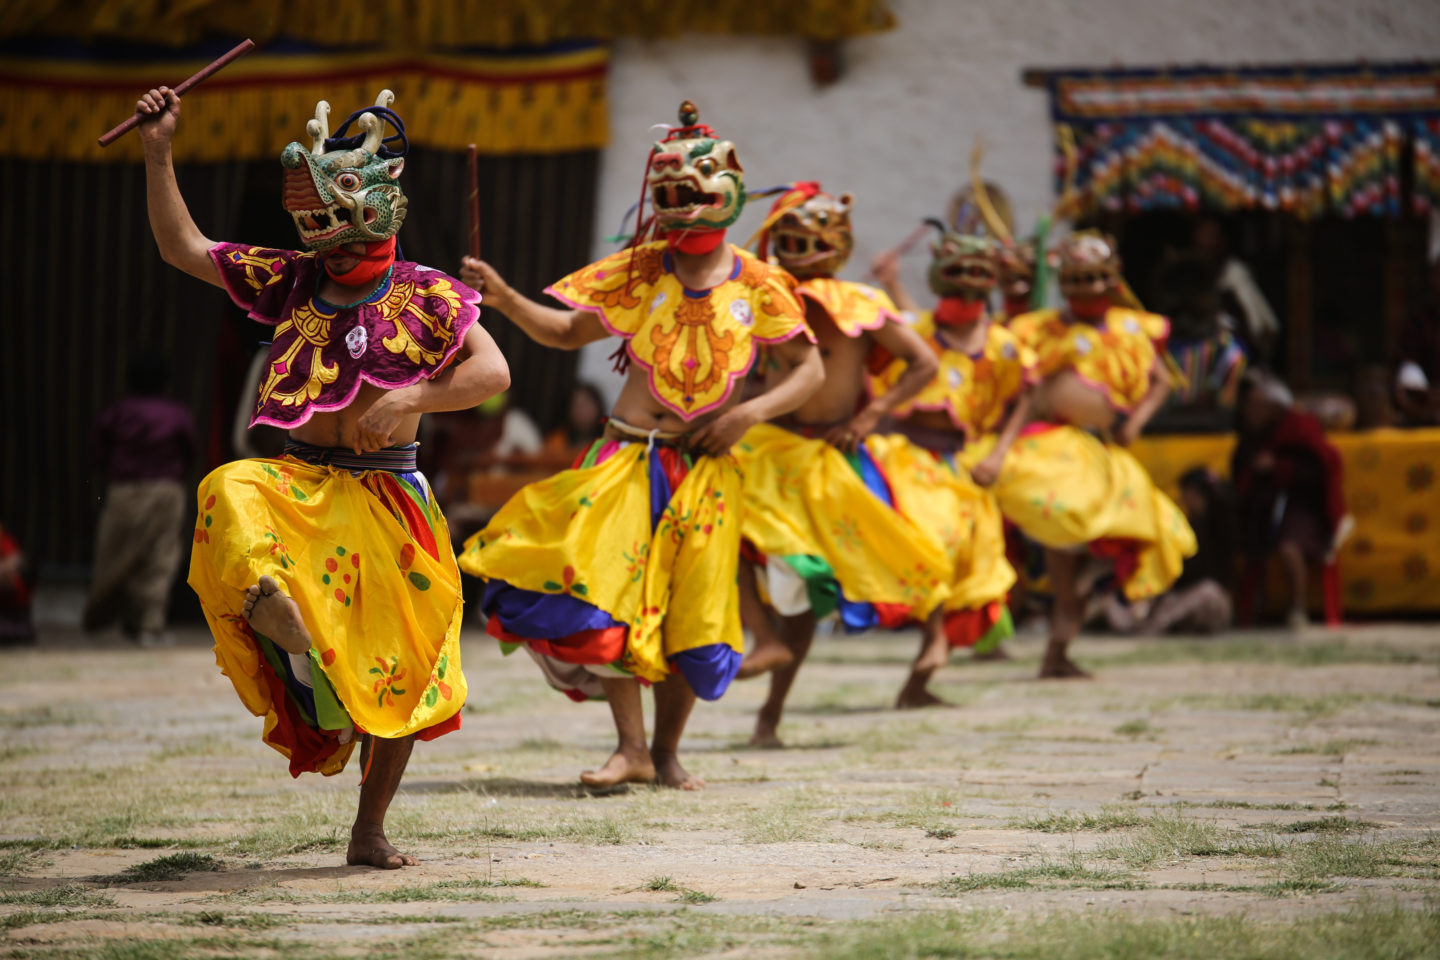 Traditional dance and colors of festival in Bhutan